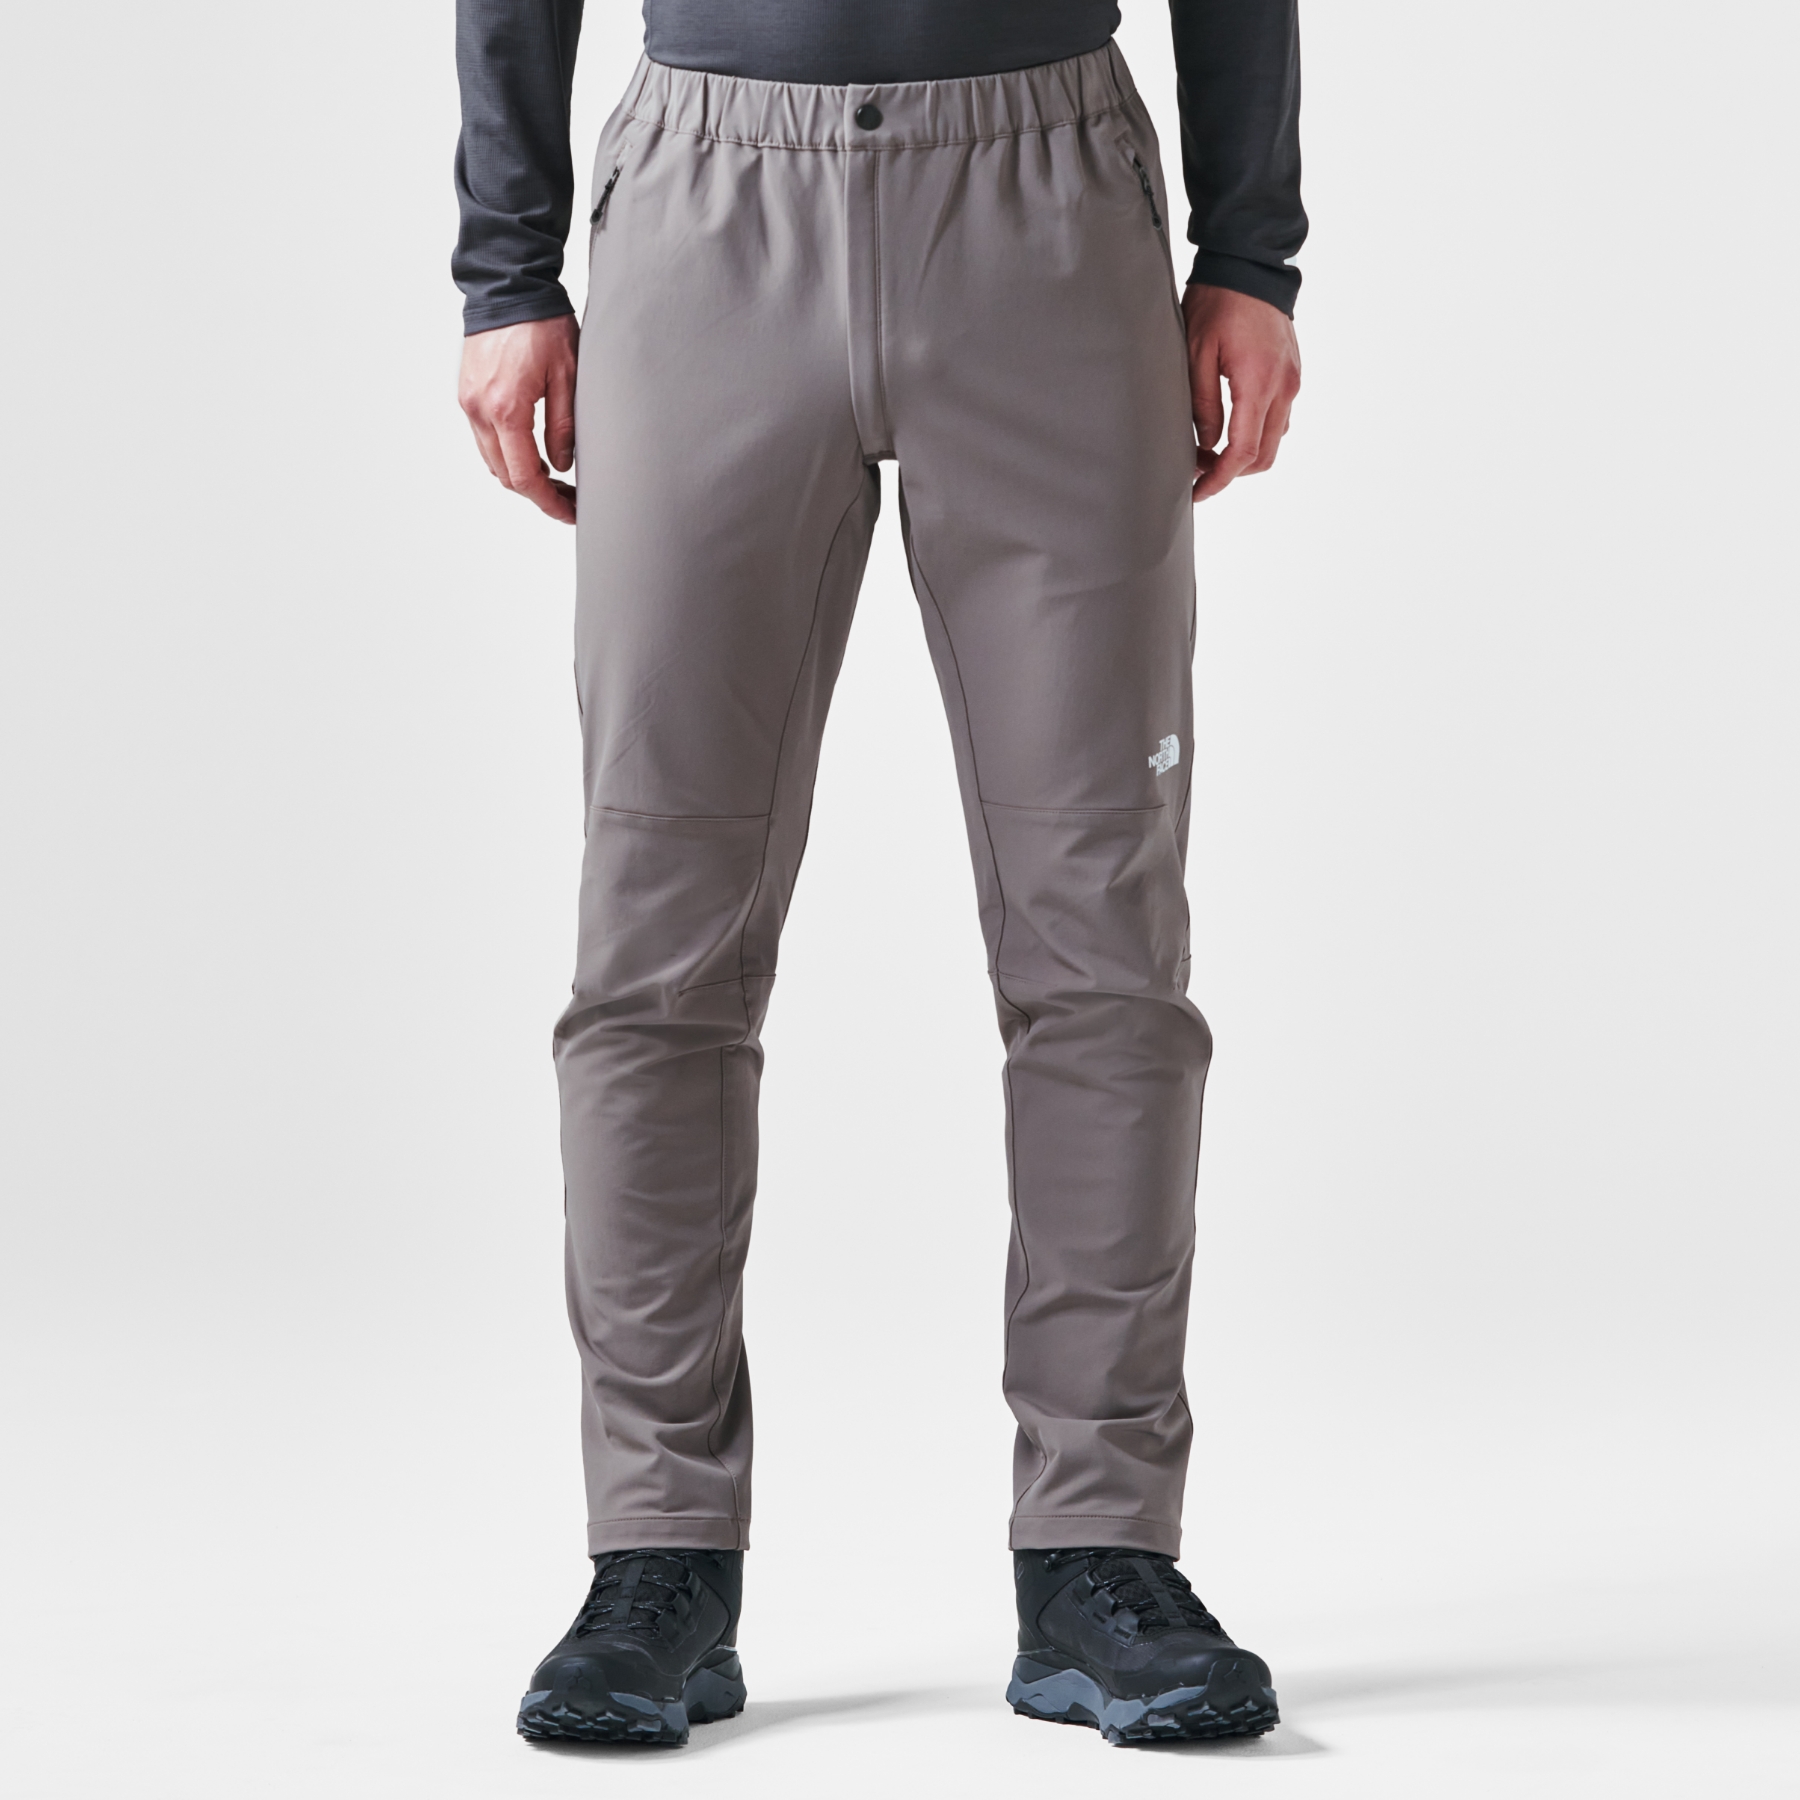 ALPINE LIGHT PANT (NB32210) - THE NORTH FACE MOUNTAIN